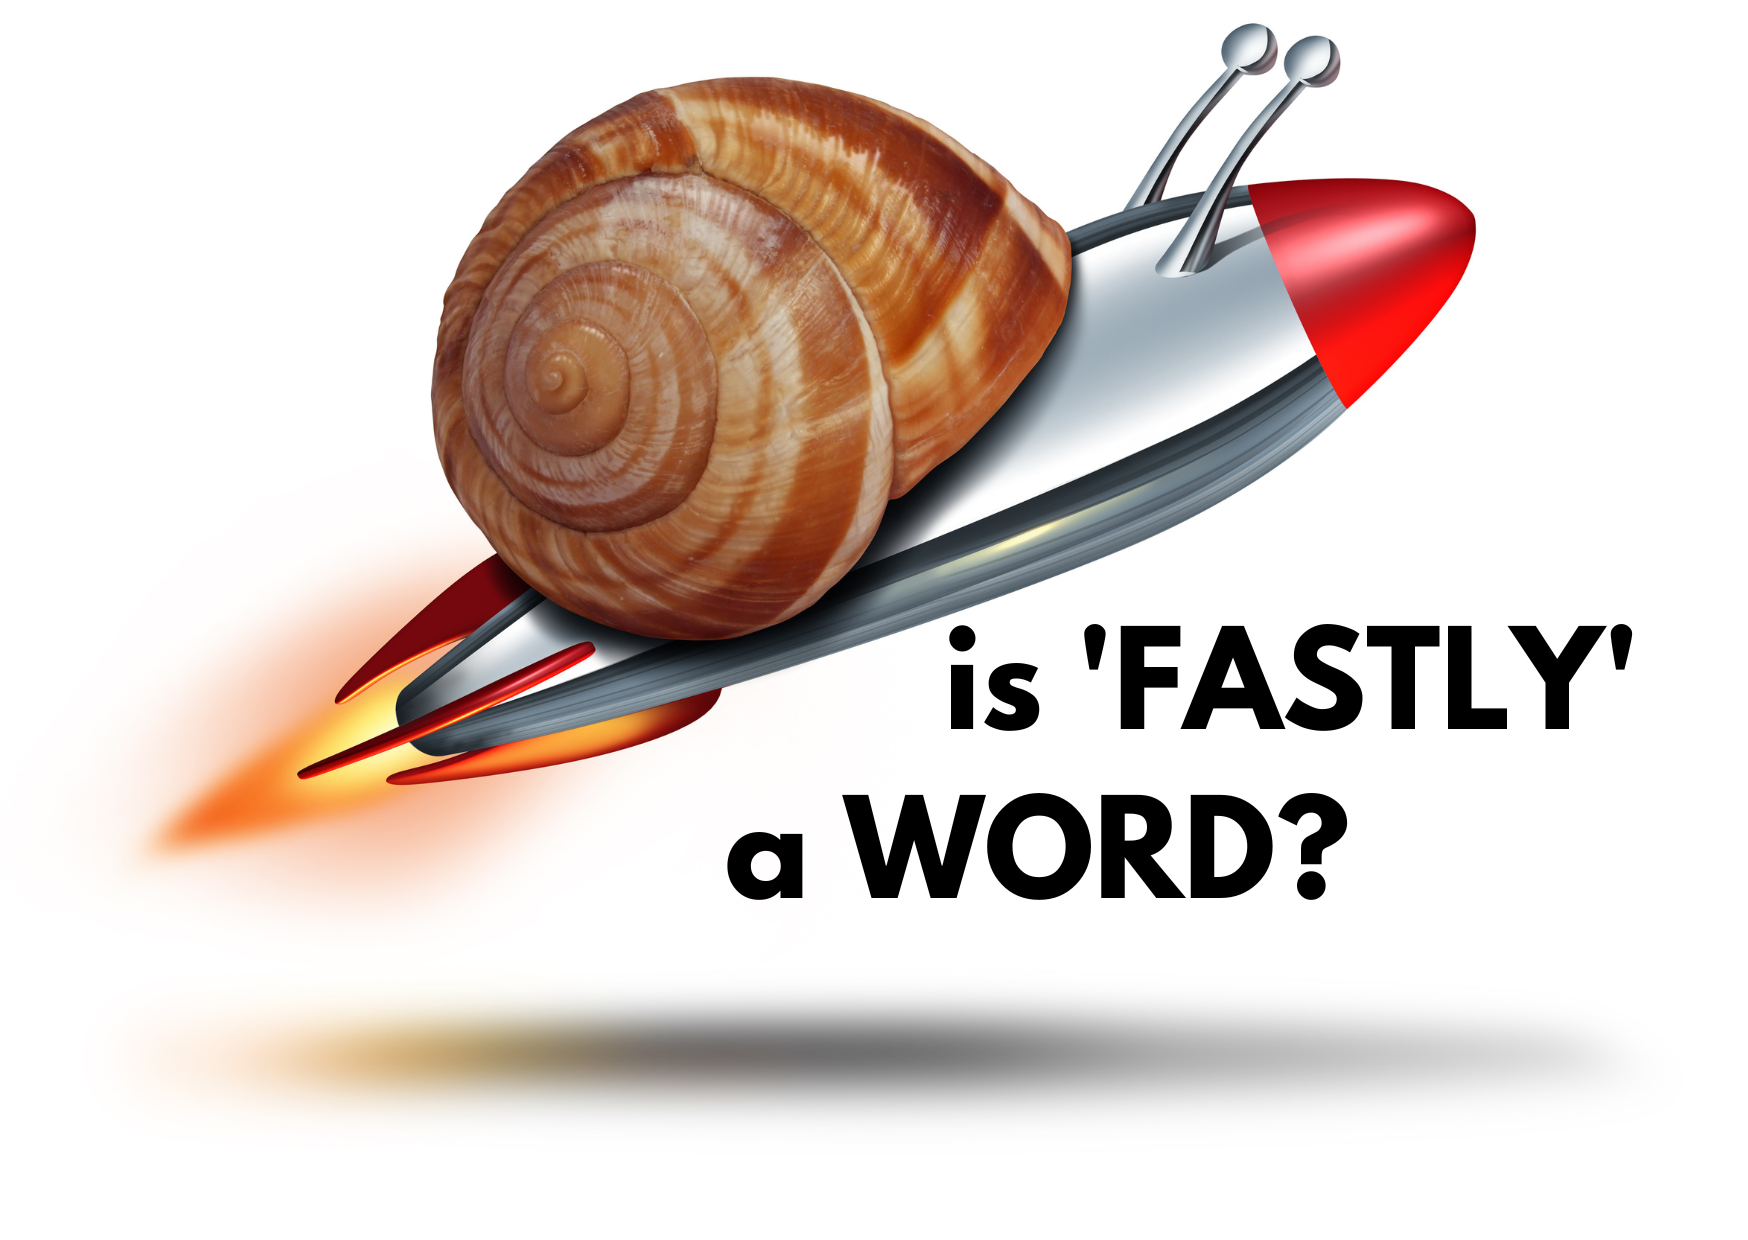 A picture of a snail shell on top of a speeding rocket with the words 